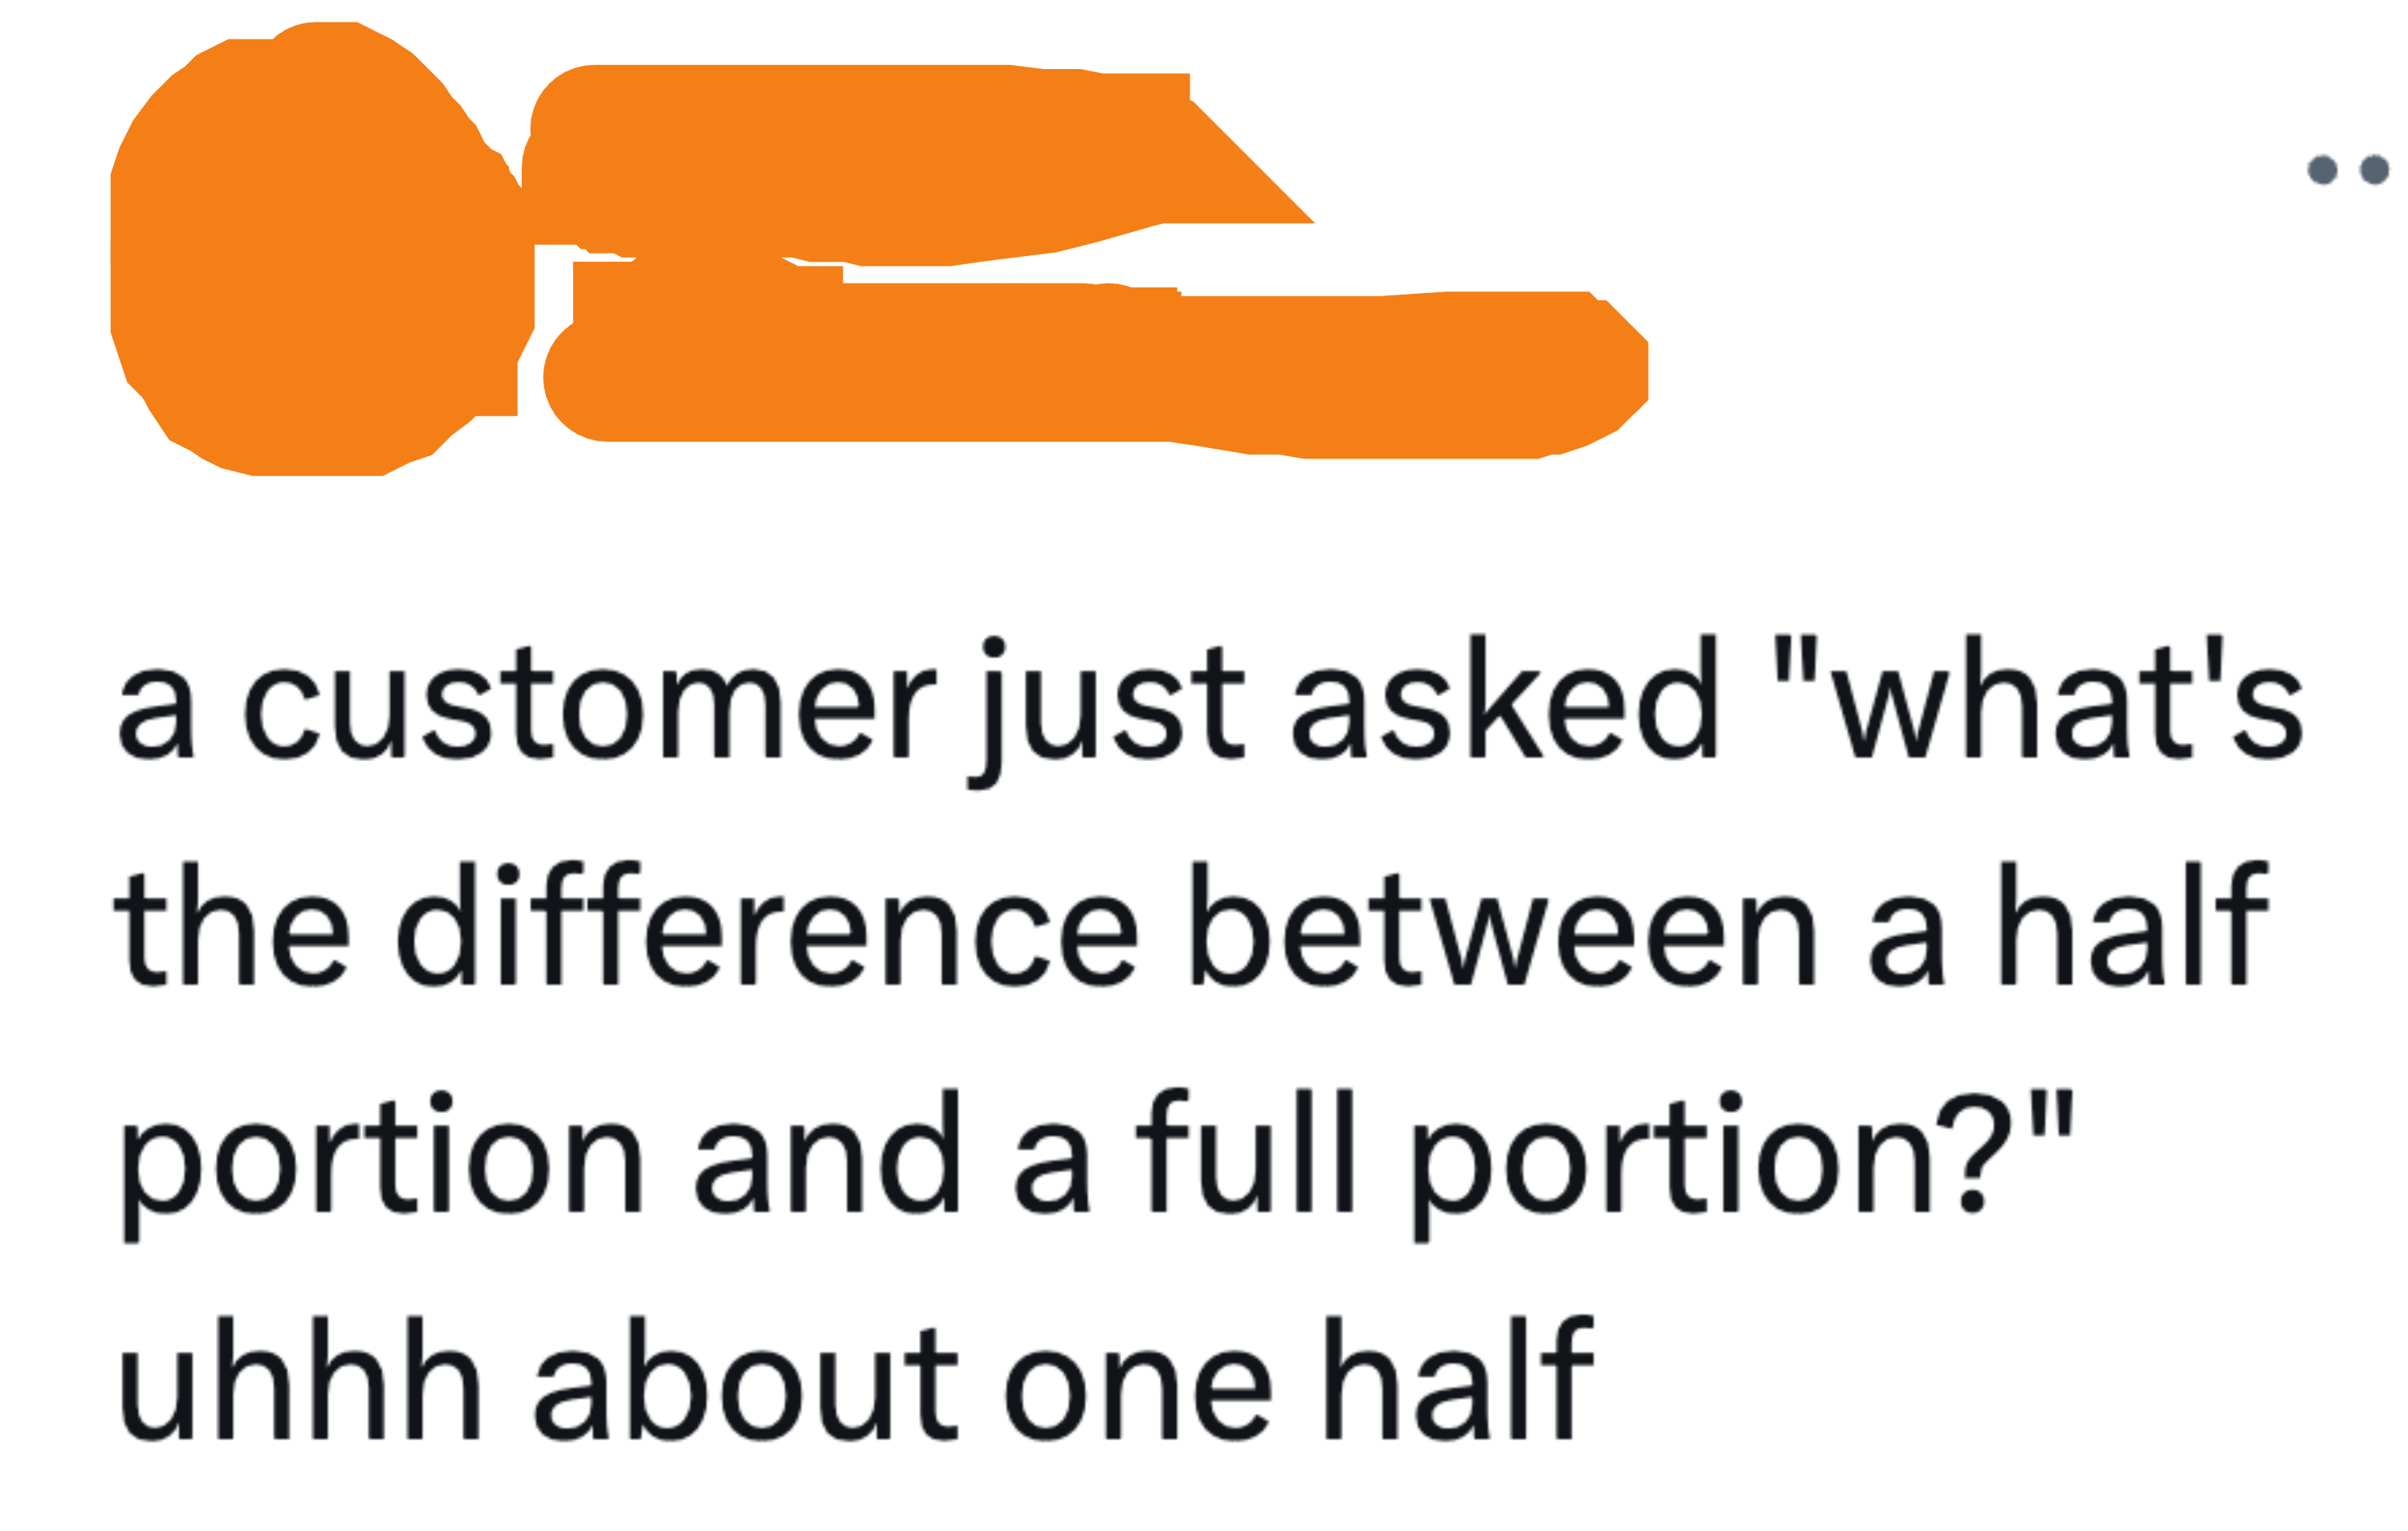 Social media post mocking a customer&#x27;s question about portion sizes, humorously stating the obvious difference